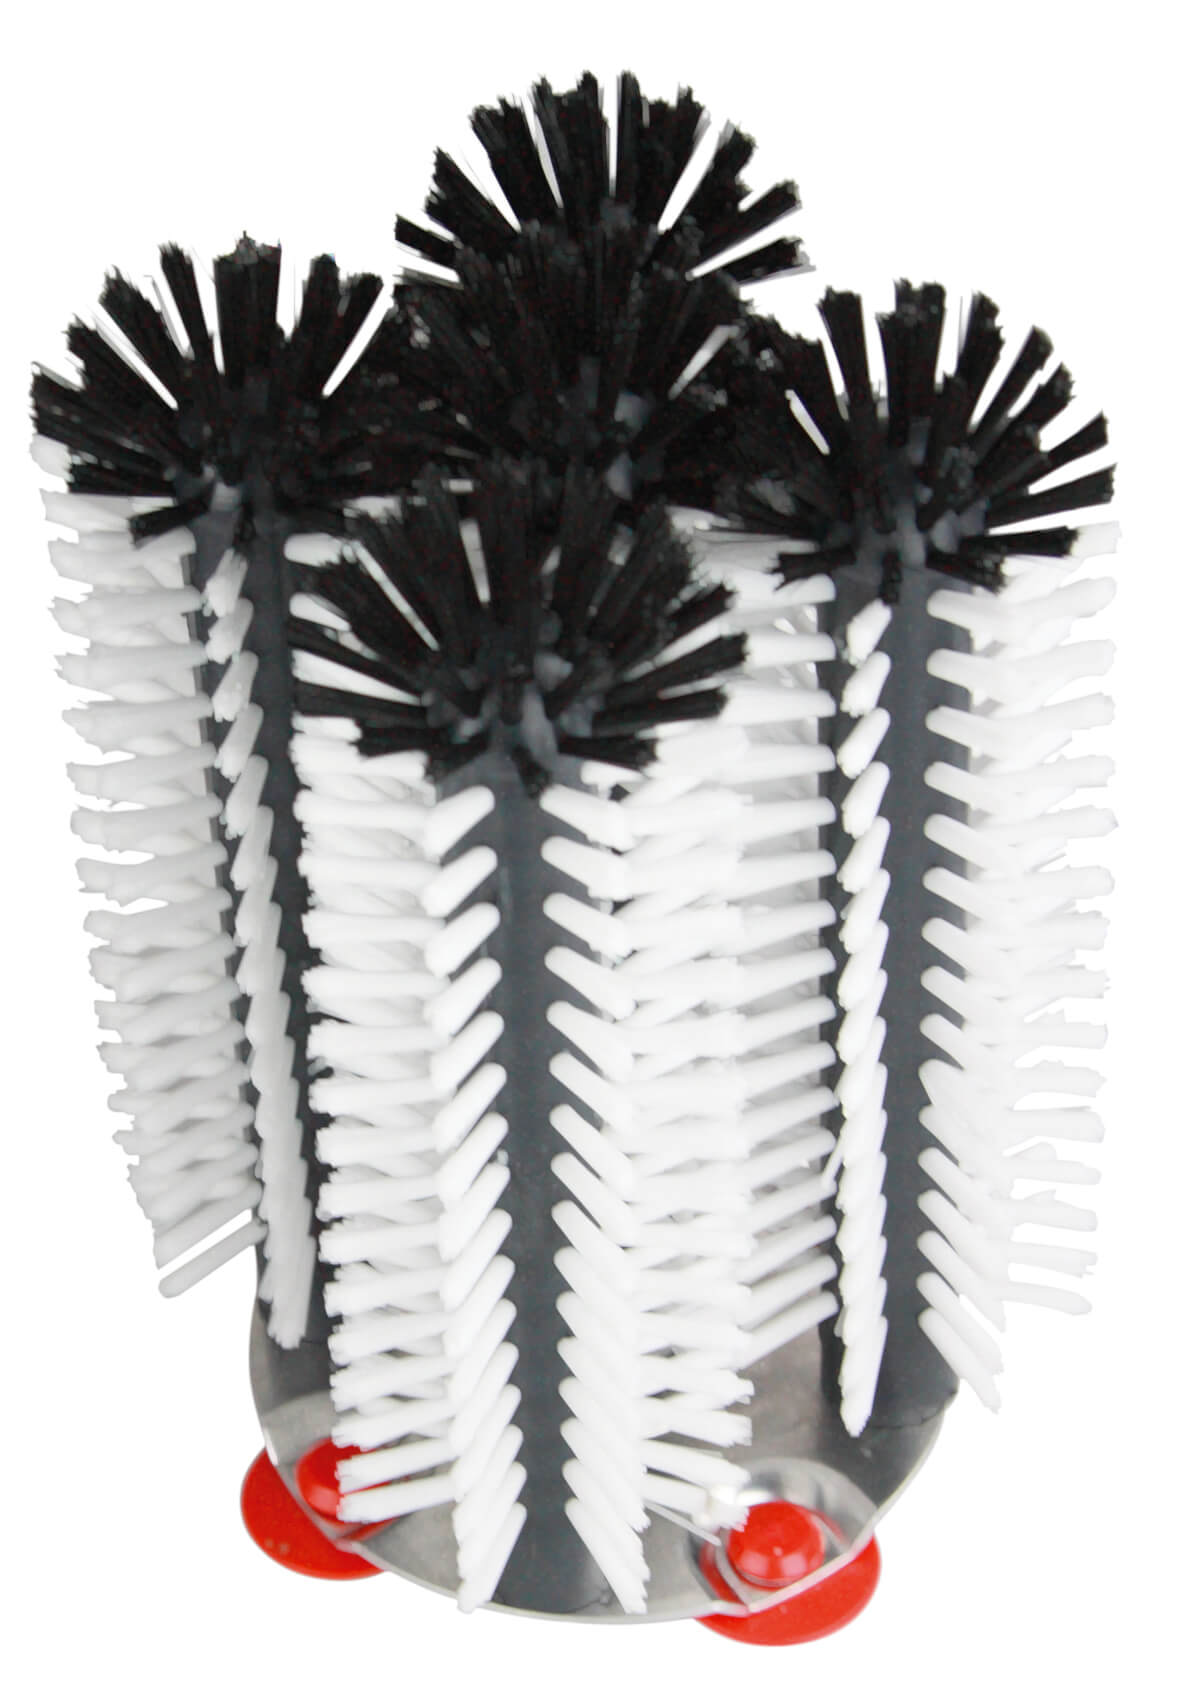 Glass cleaning brush - 5-piece